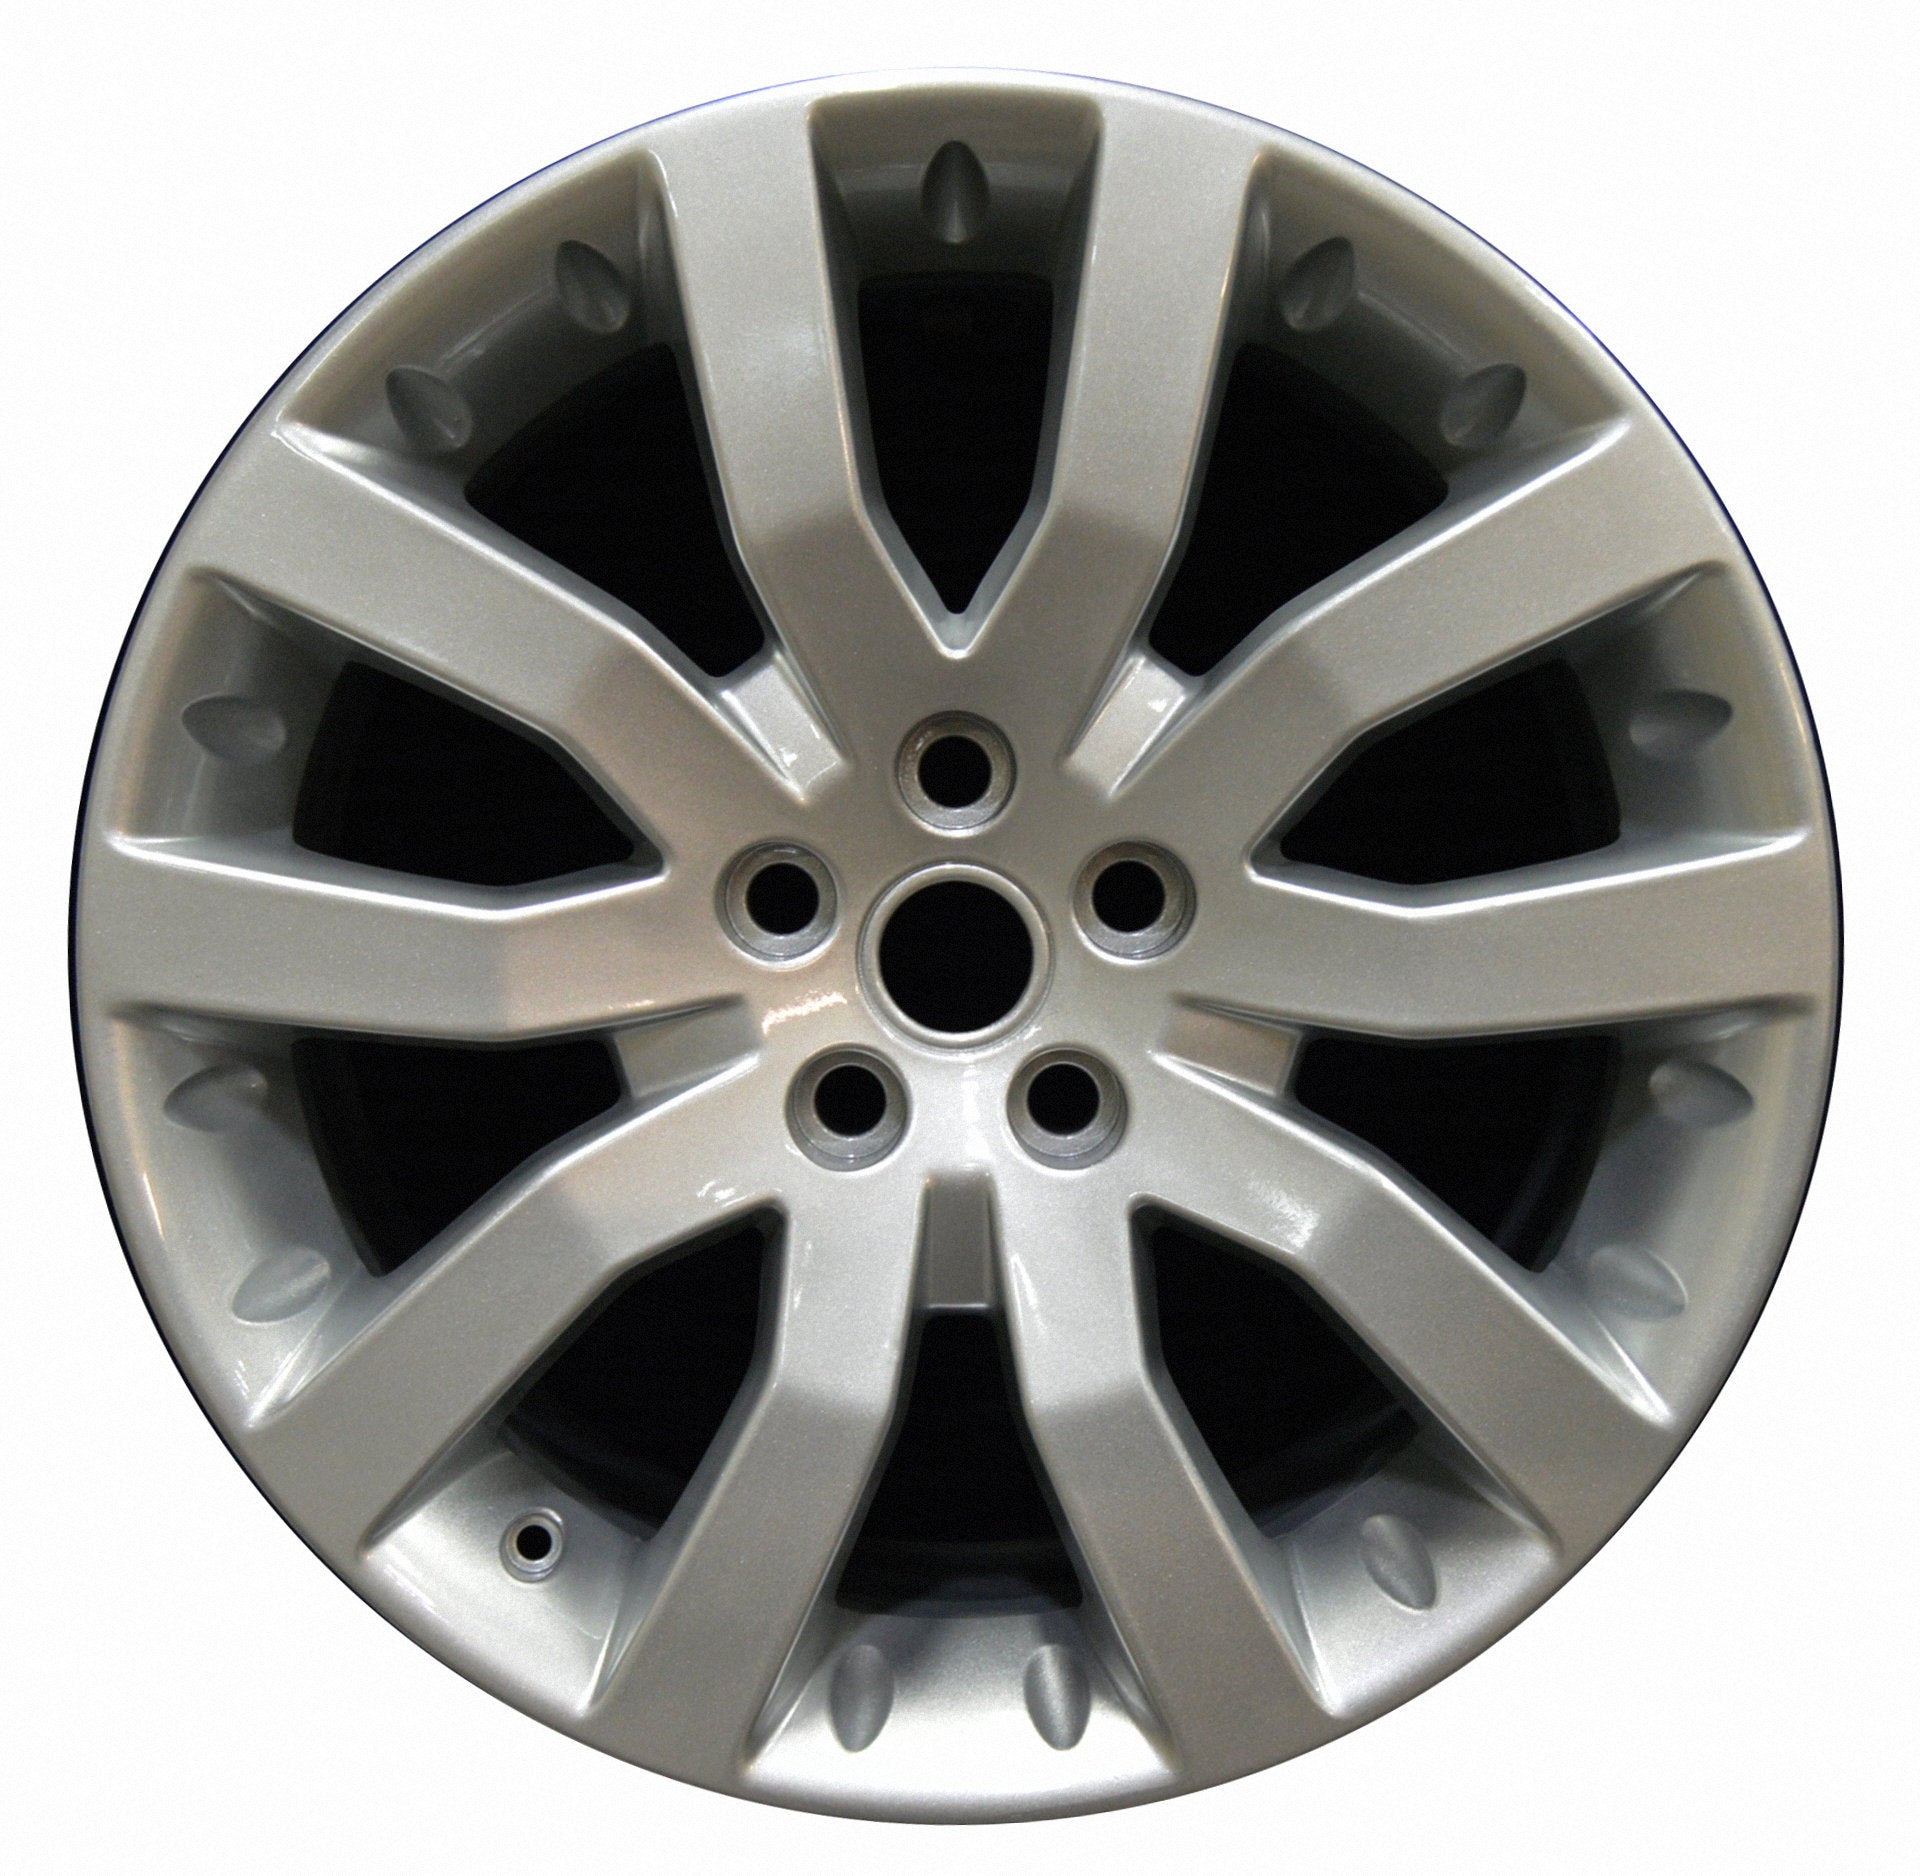 Land Rover Range Rover  2005, 2006, 2007, 2008, 2009 Factory OEM Car Wheel Size 20x9.5 Alloy WAO.72196.PS08.FF